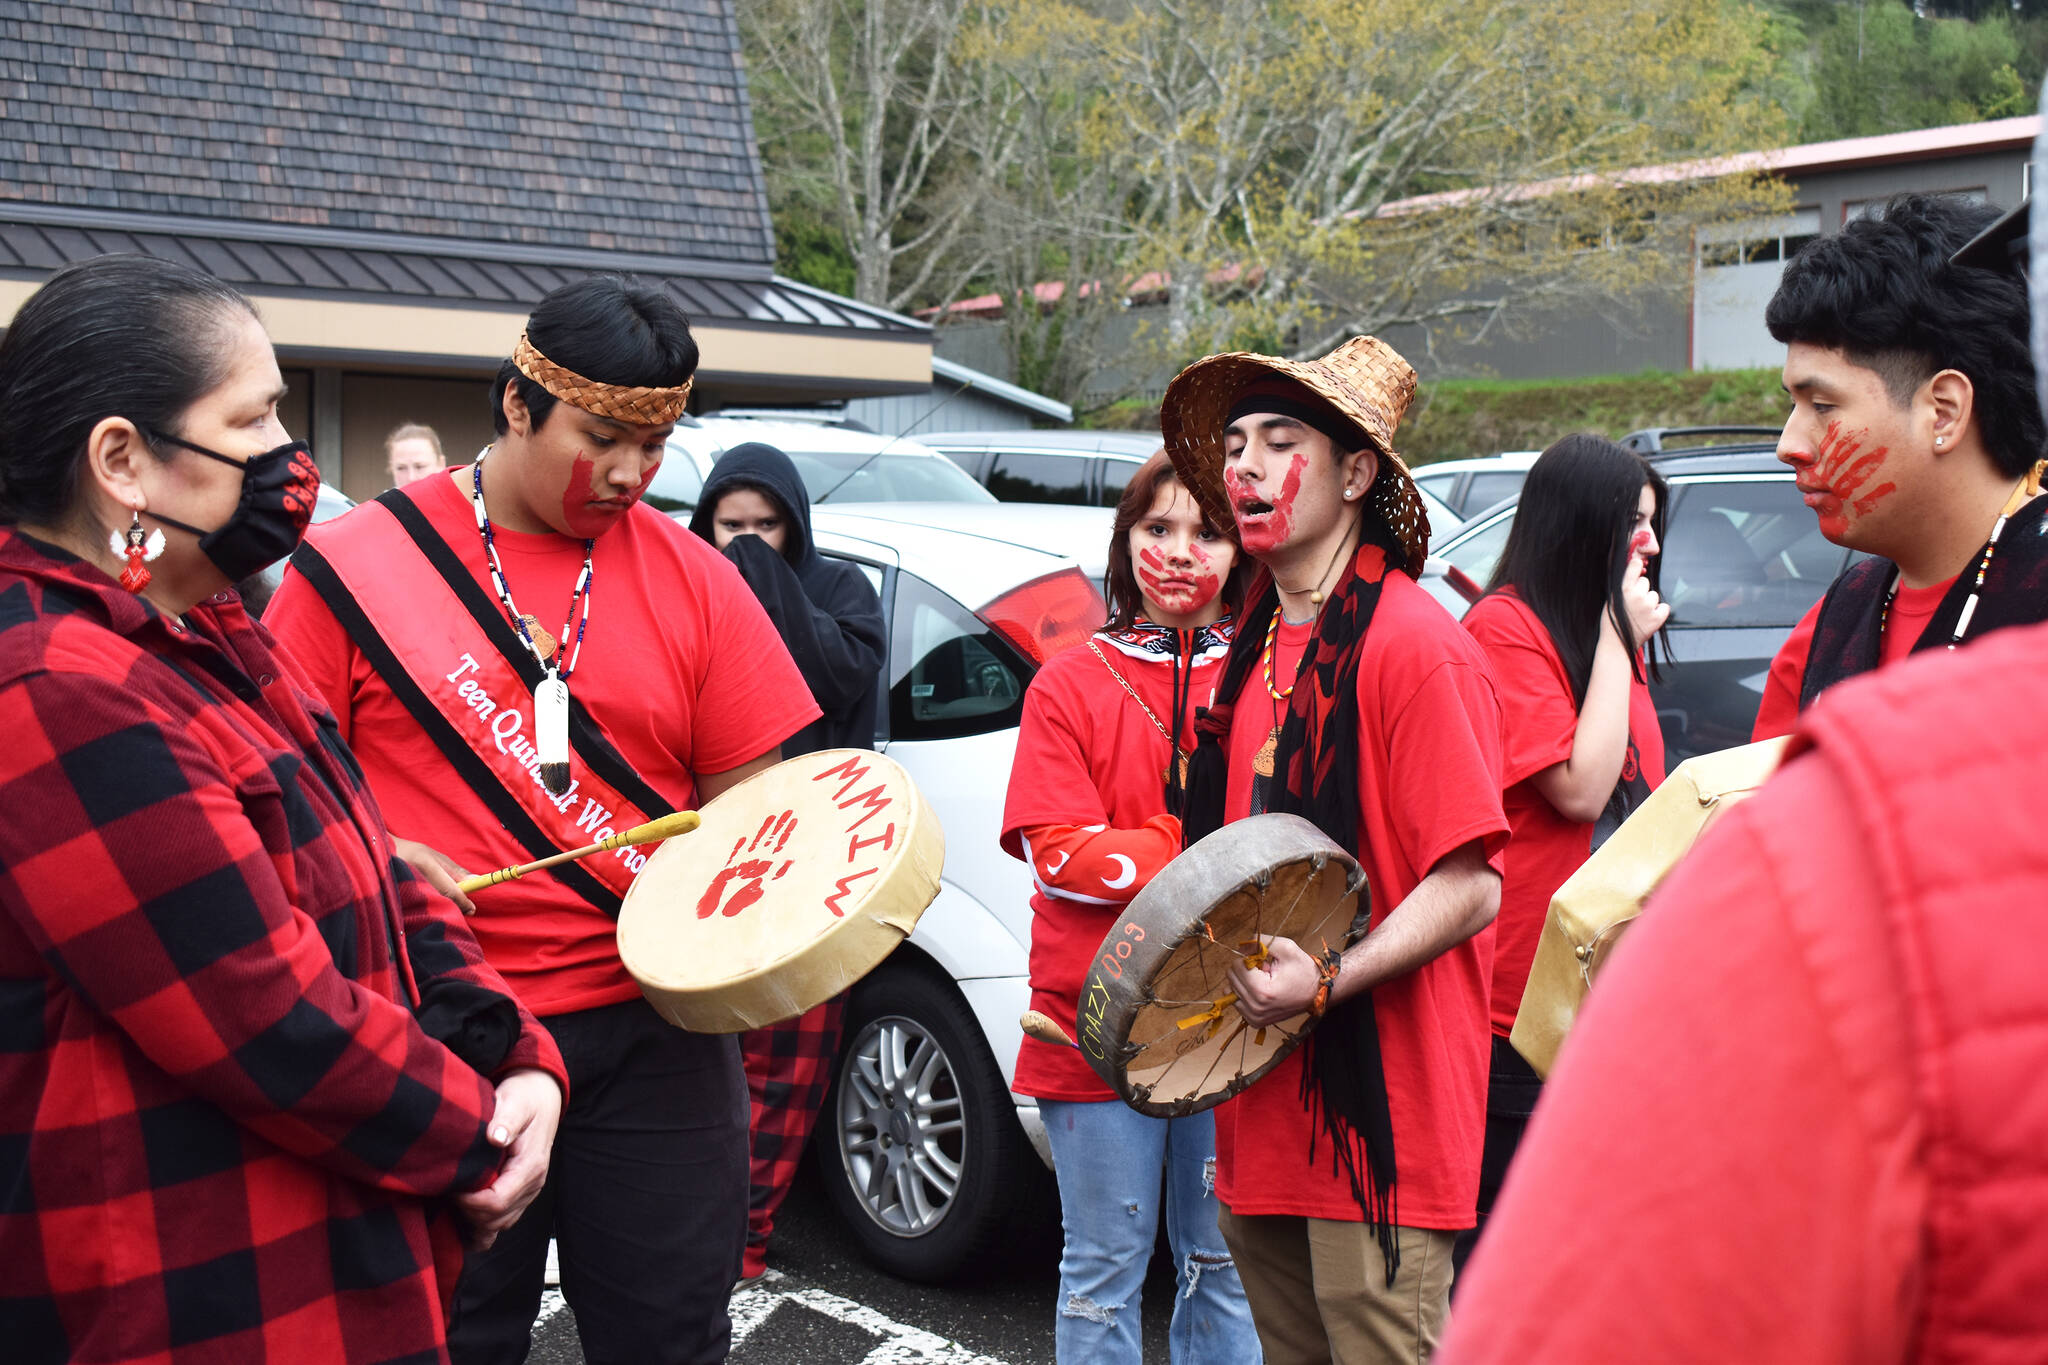 Matthew N. Wells / The Daily World
Right before the start of the Missing Murdered Indigenous Woman walk on Friday, Omar Ivan Estrada, second from left, Tyson Reece, center with drum and Anthony Watkins, helped lead the walk in a Mourning Prayer song. In addition to the three students mentioned, they couldn’t have done it without their female classmates, who Reece called “warriors.”